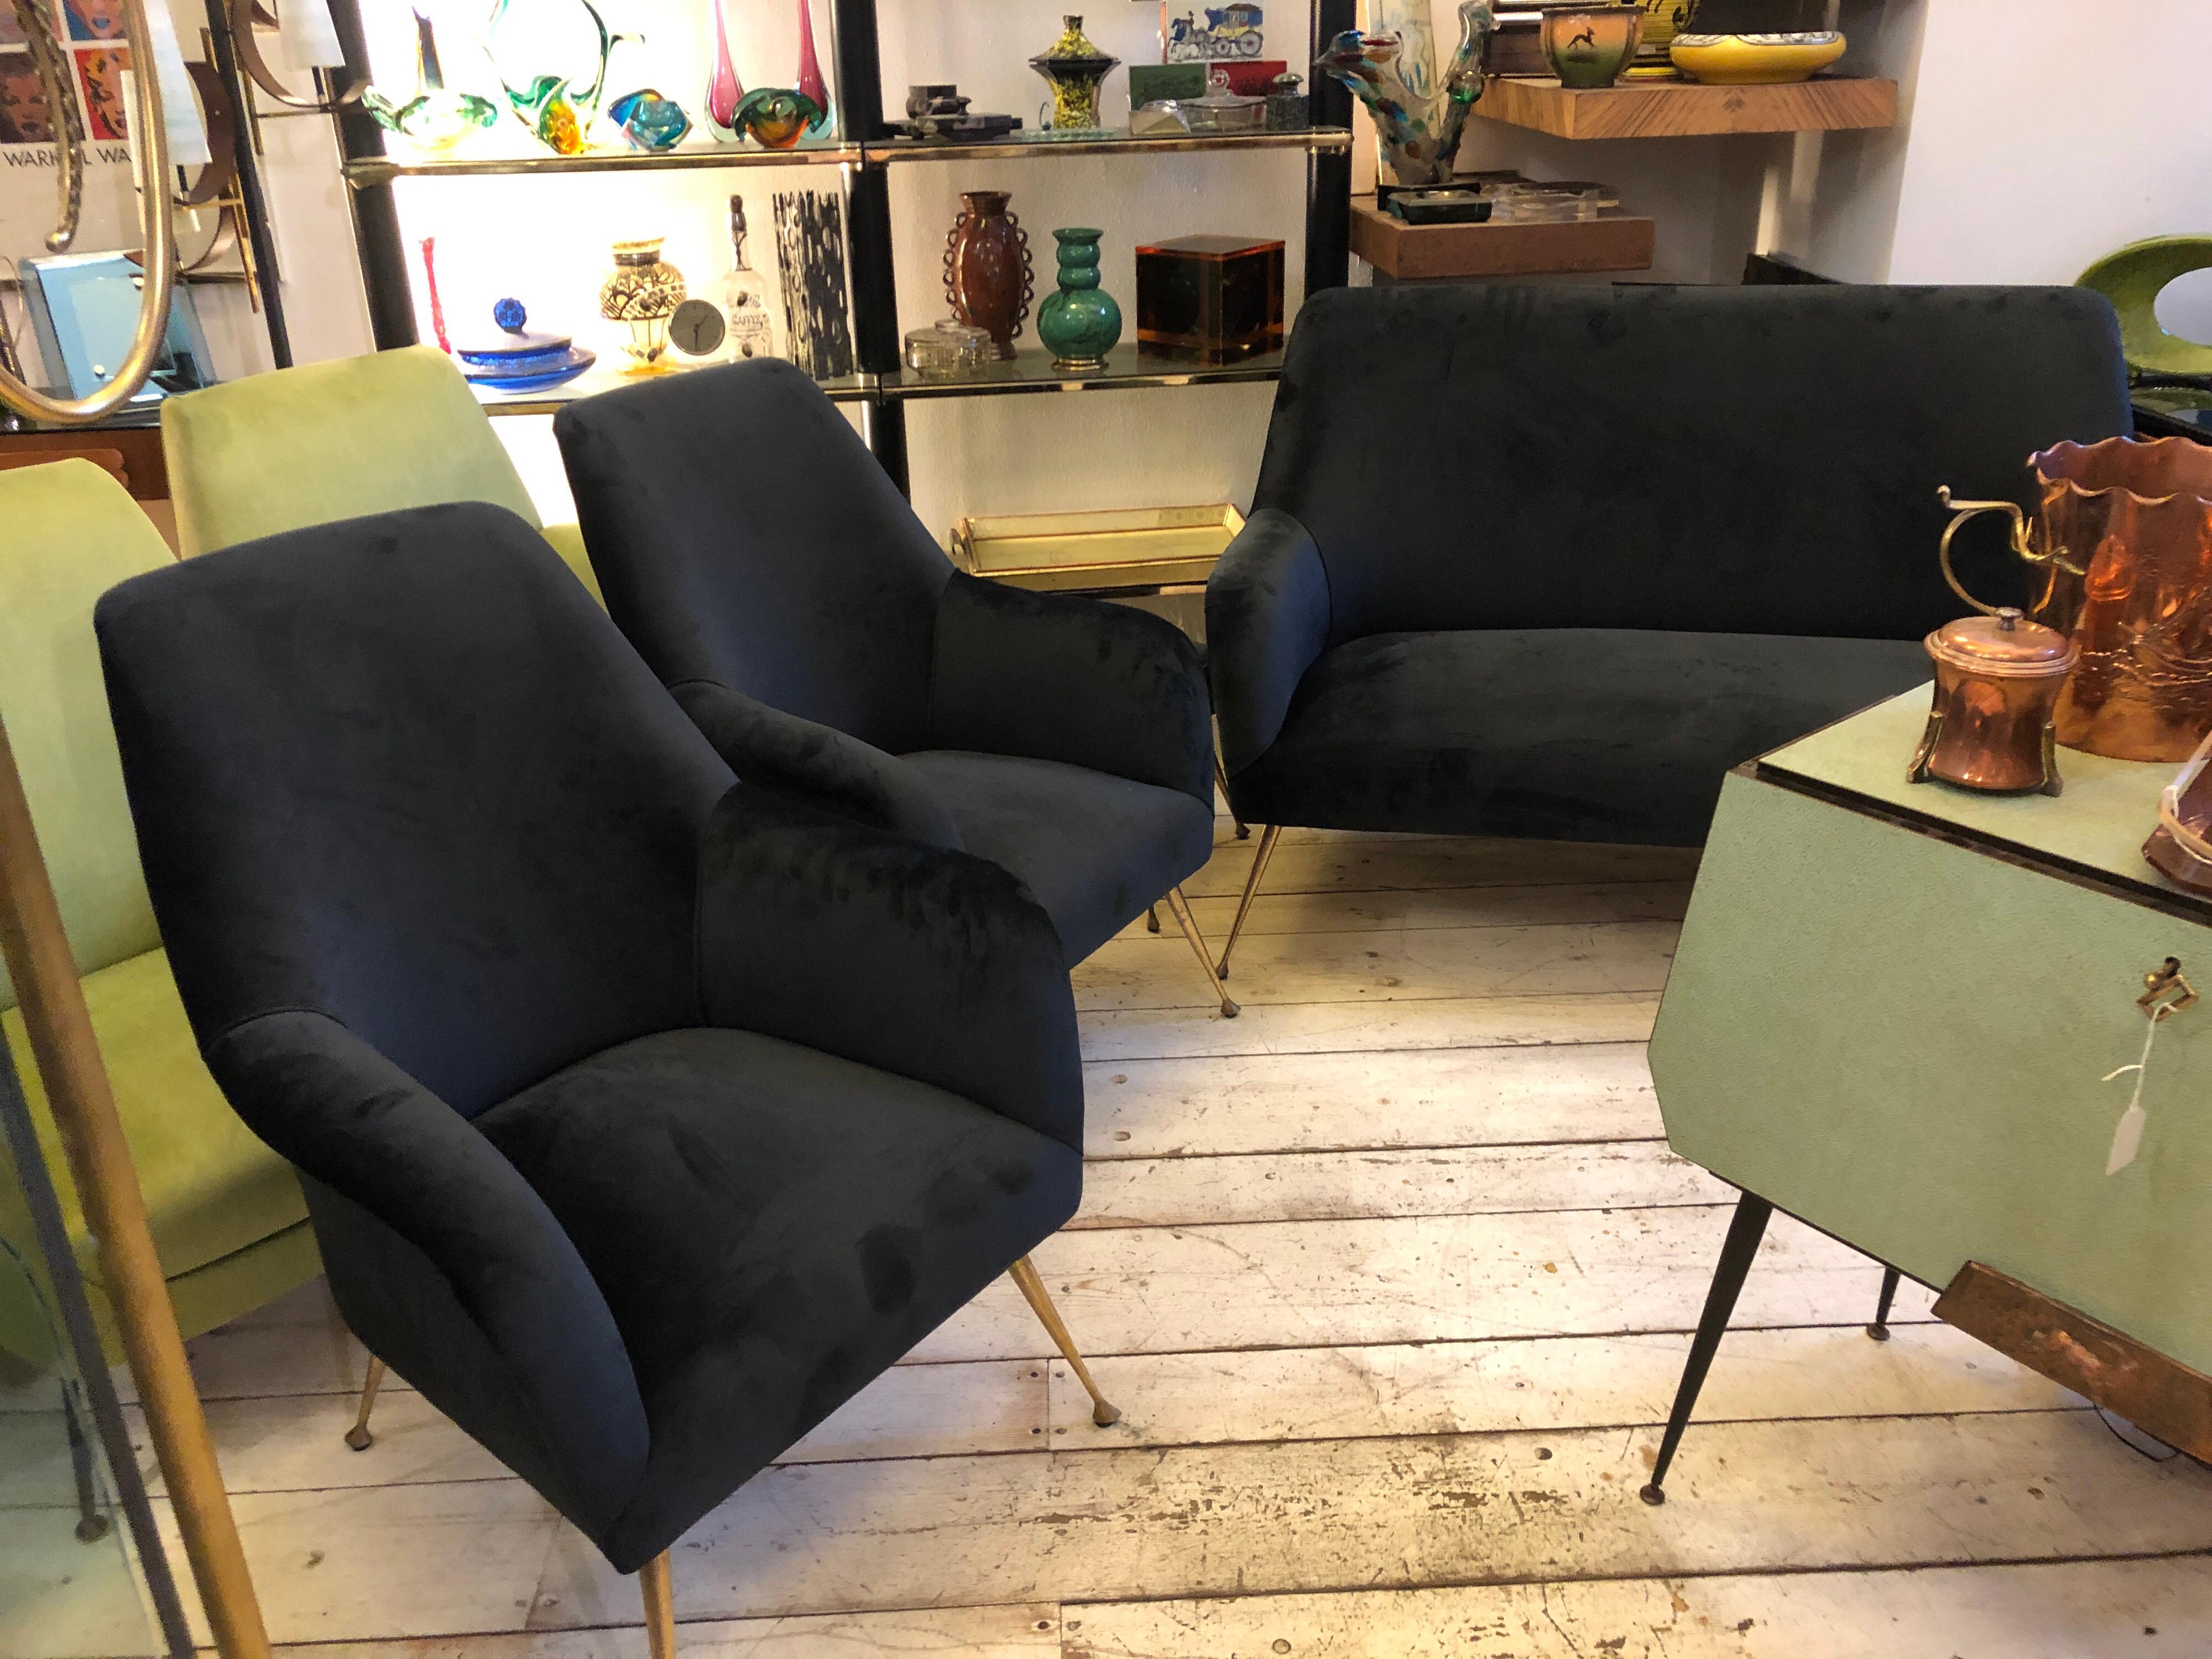 A Mid-Century Modern Living room seating set composed by a Sofa, two armchairs and two stools in the manner of Minotti, made in Italy in the 1950s, has been upholstered with a gorgeous black velvet. 